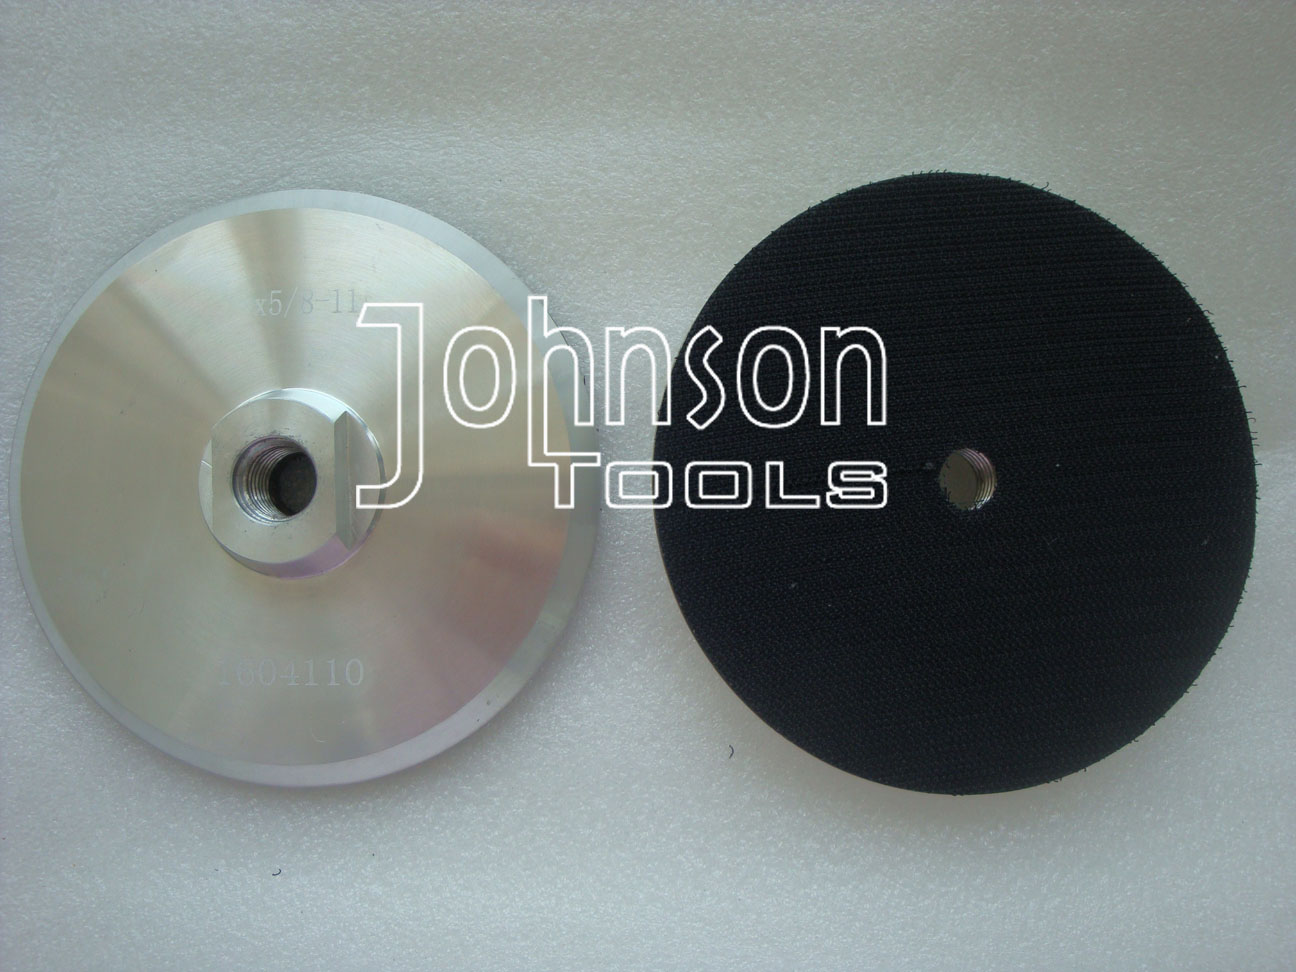 75-180mm Aluminum Backing Pad for Angle Grinder